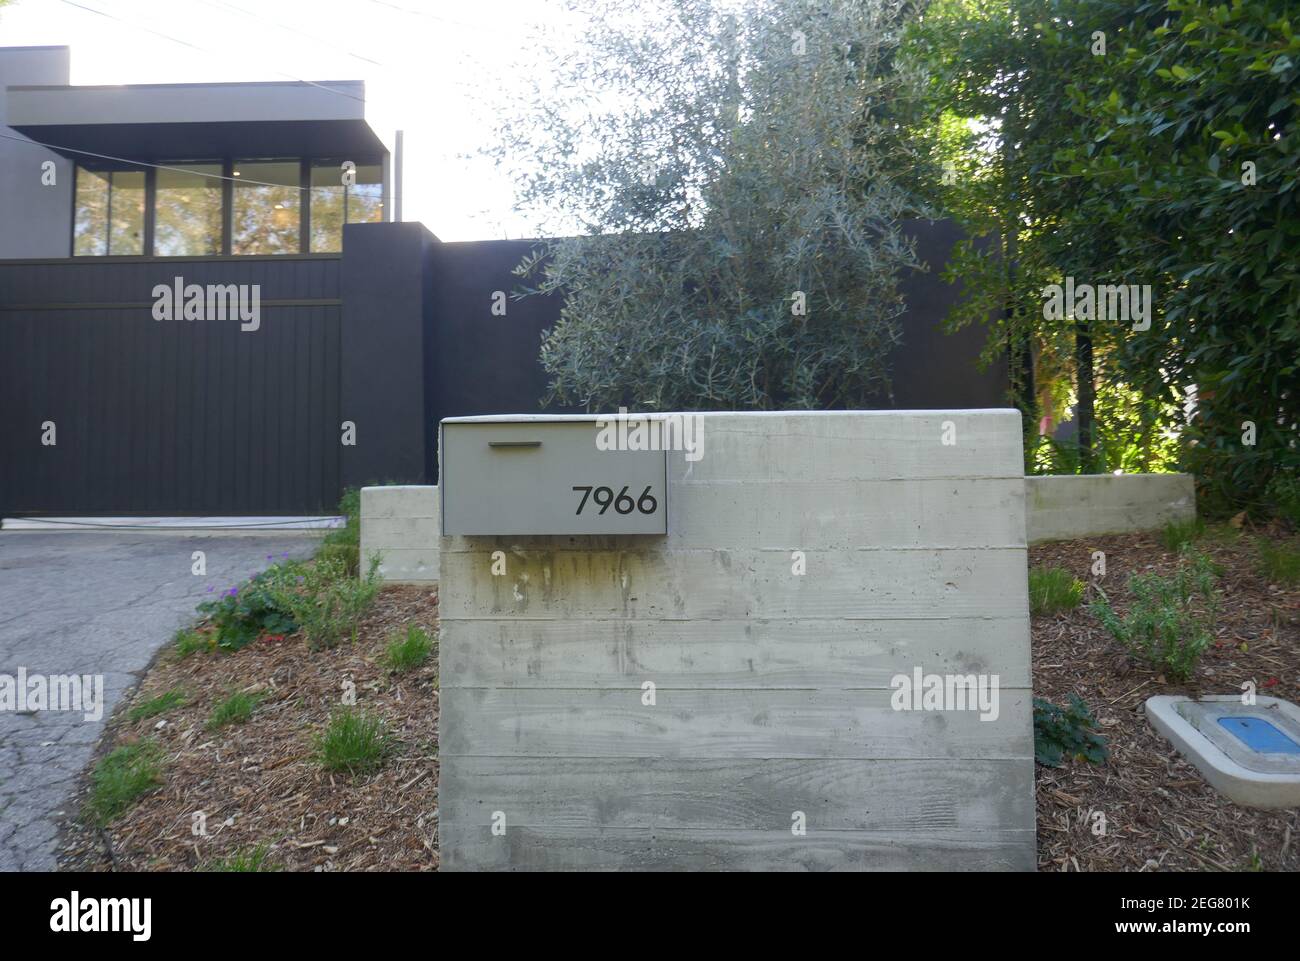 Los Angeles, California, USA 17th February 2021 A general view of atmosphere of actress Meg Ryan and actor Dennis Quaid's former home/house on February 17, 2021 in Los Angeles, California, USA. Photo by Barry King/Alamy Stock Photo Stock Photo